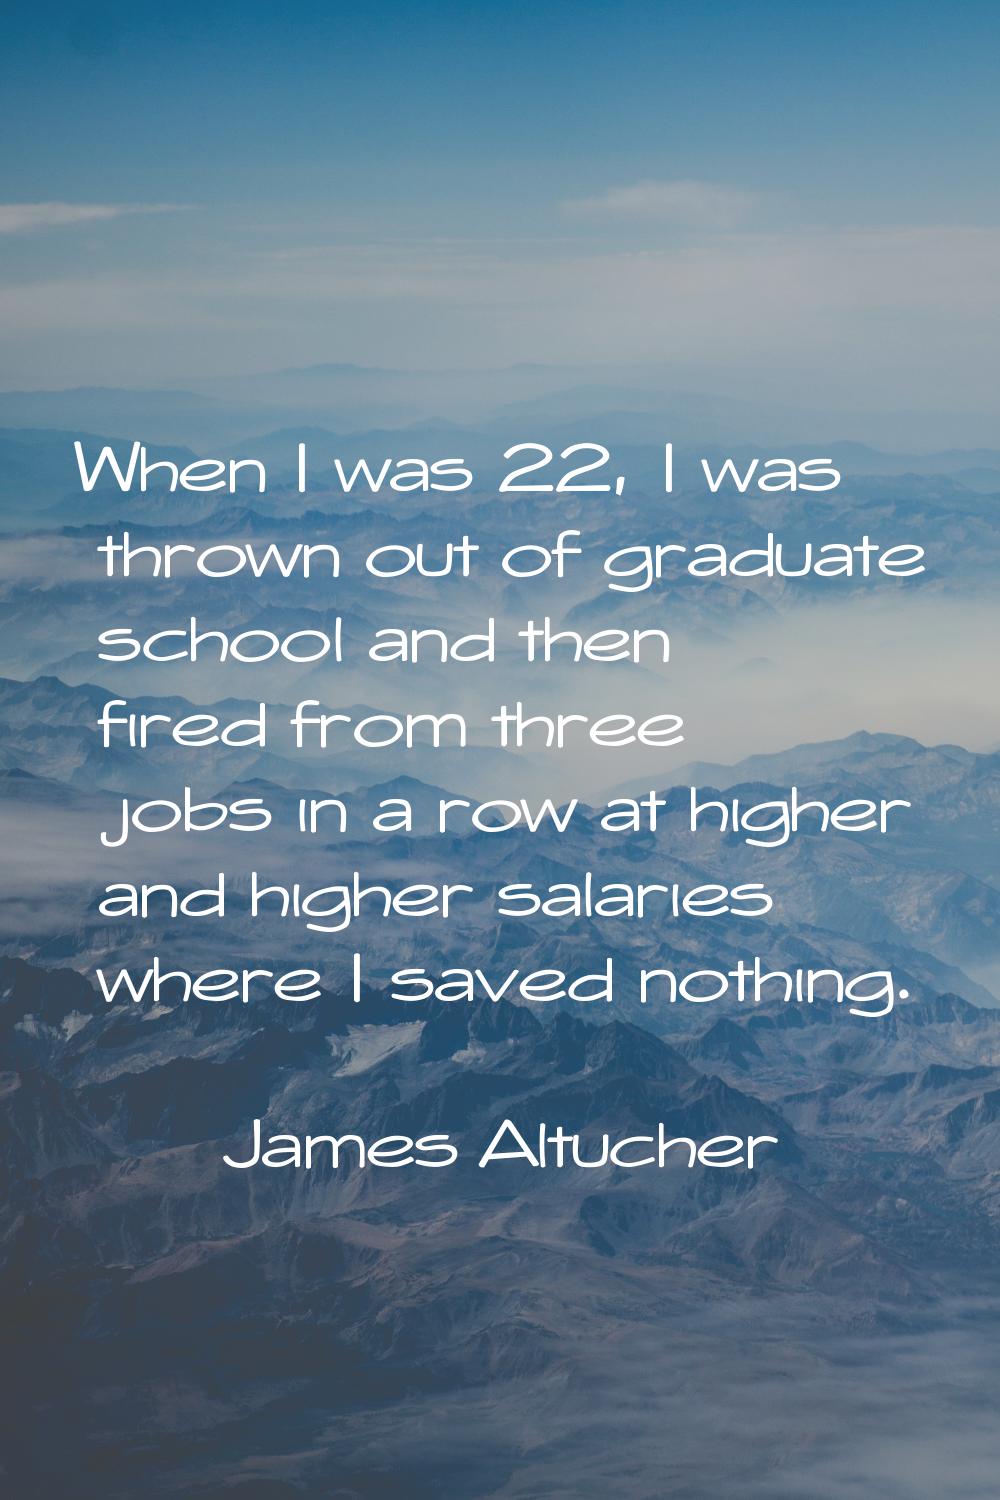 When I was 22, I was thrown out of graduate school and then fired from three jobs in a row at highe